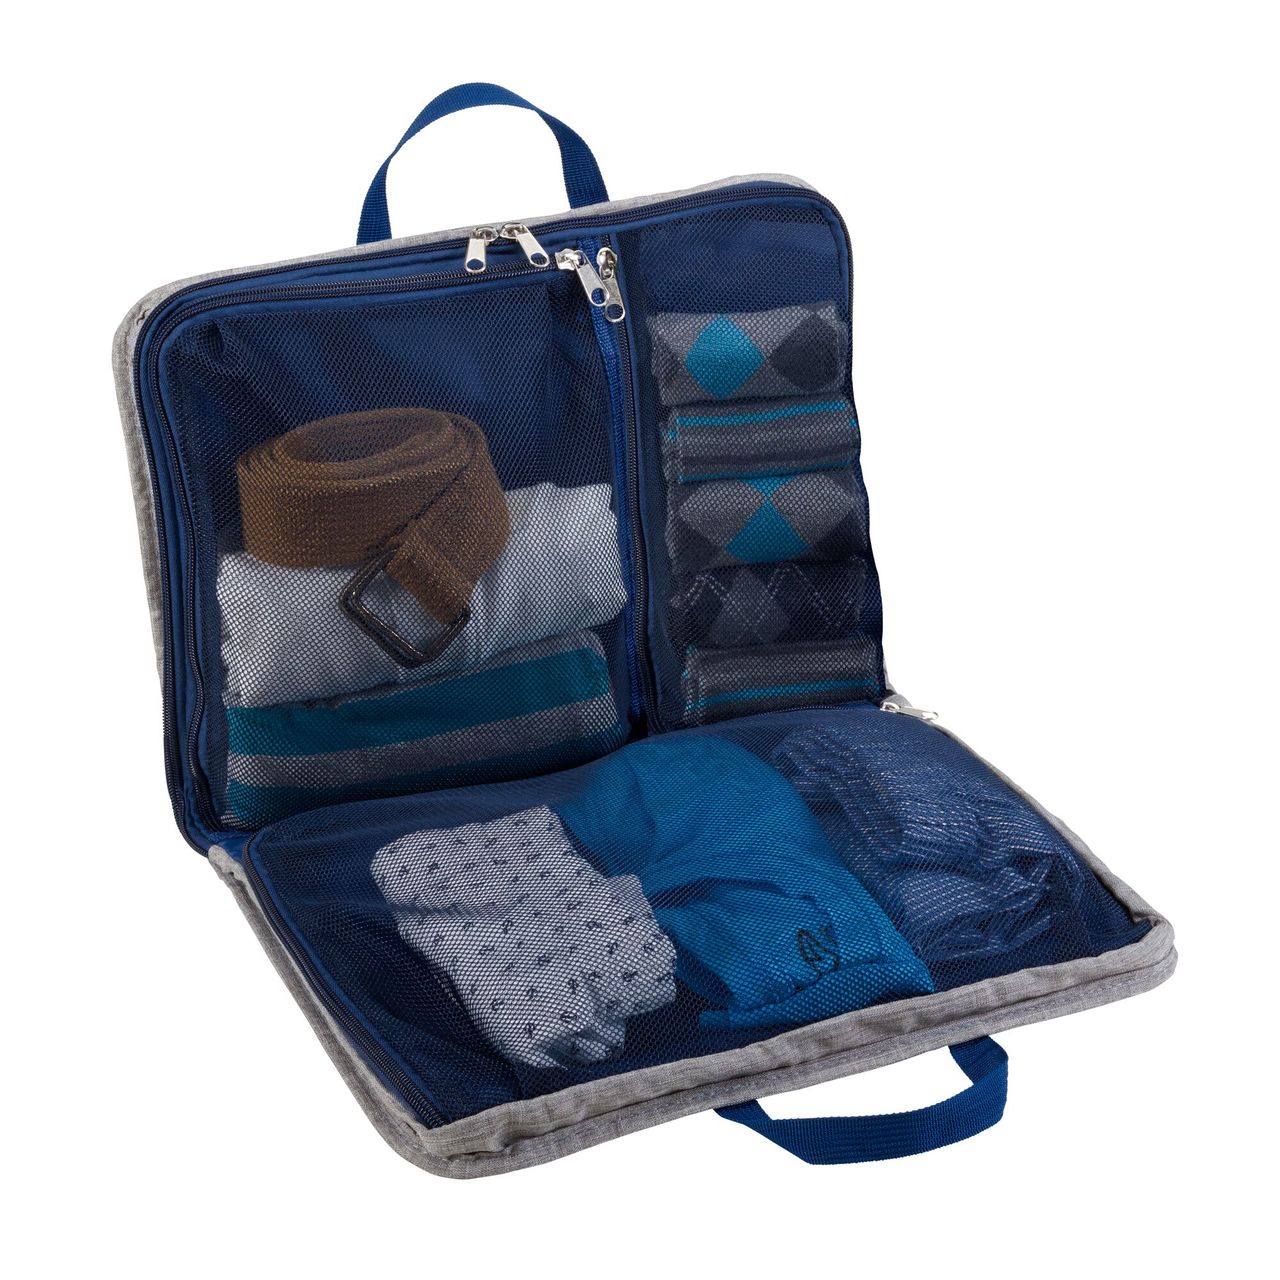 Lewis N. Clark Deluxe Packing Organizer, Carry-On